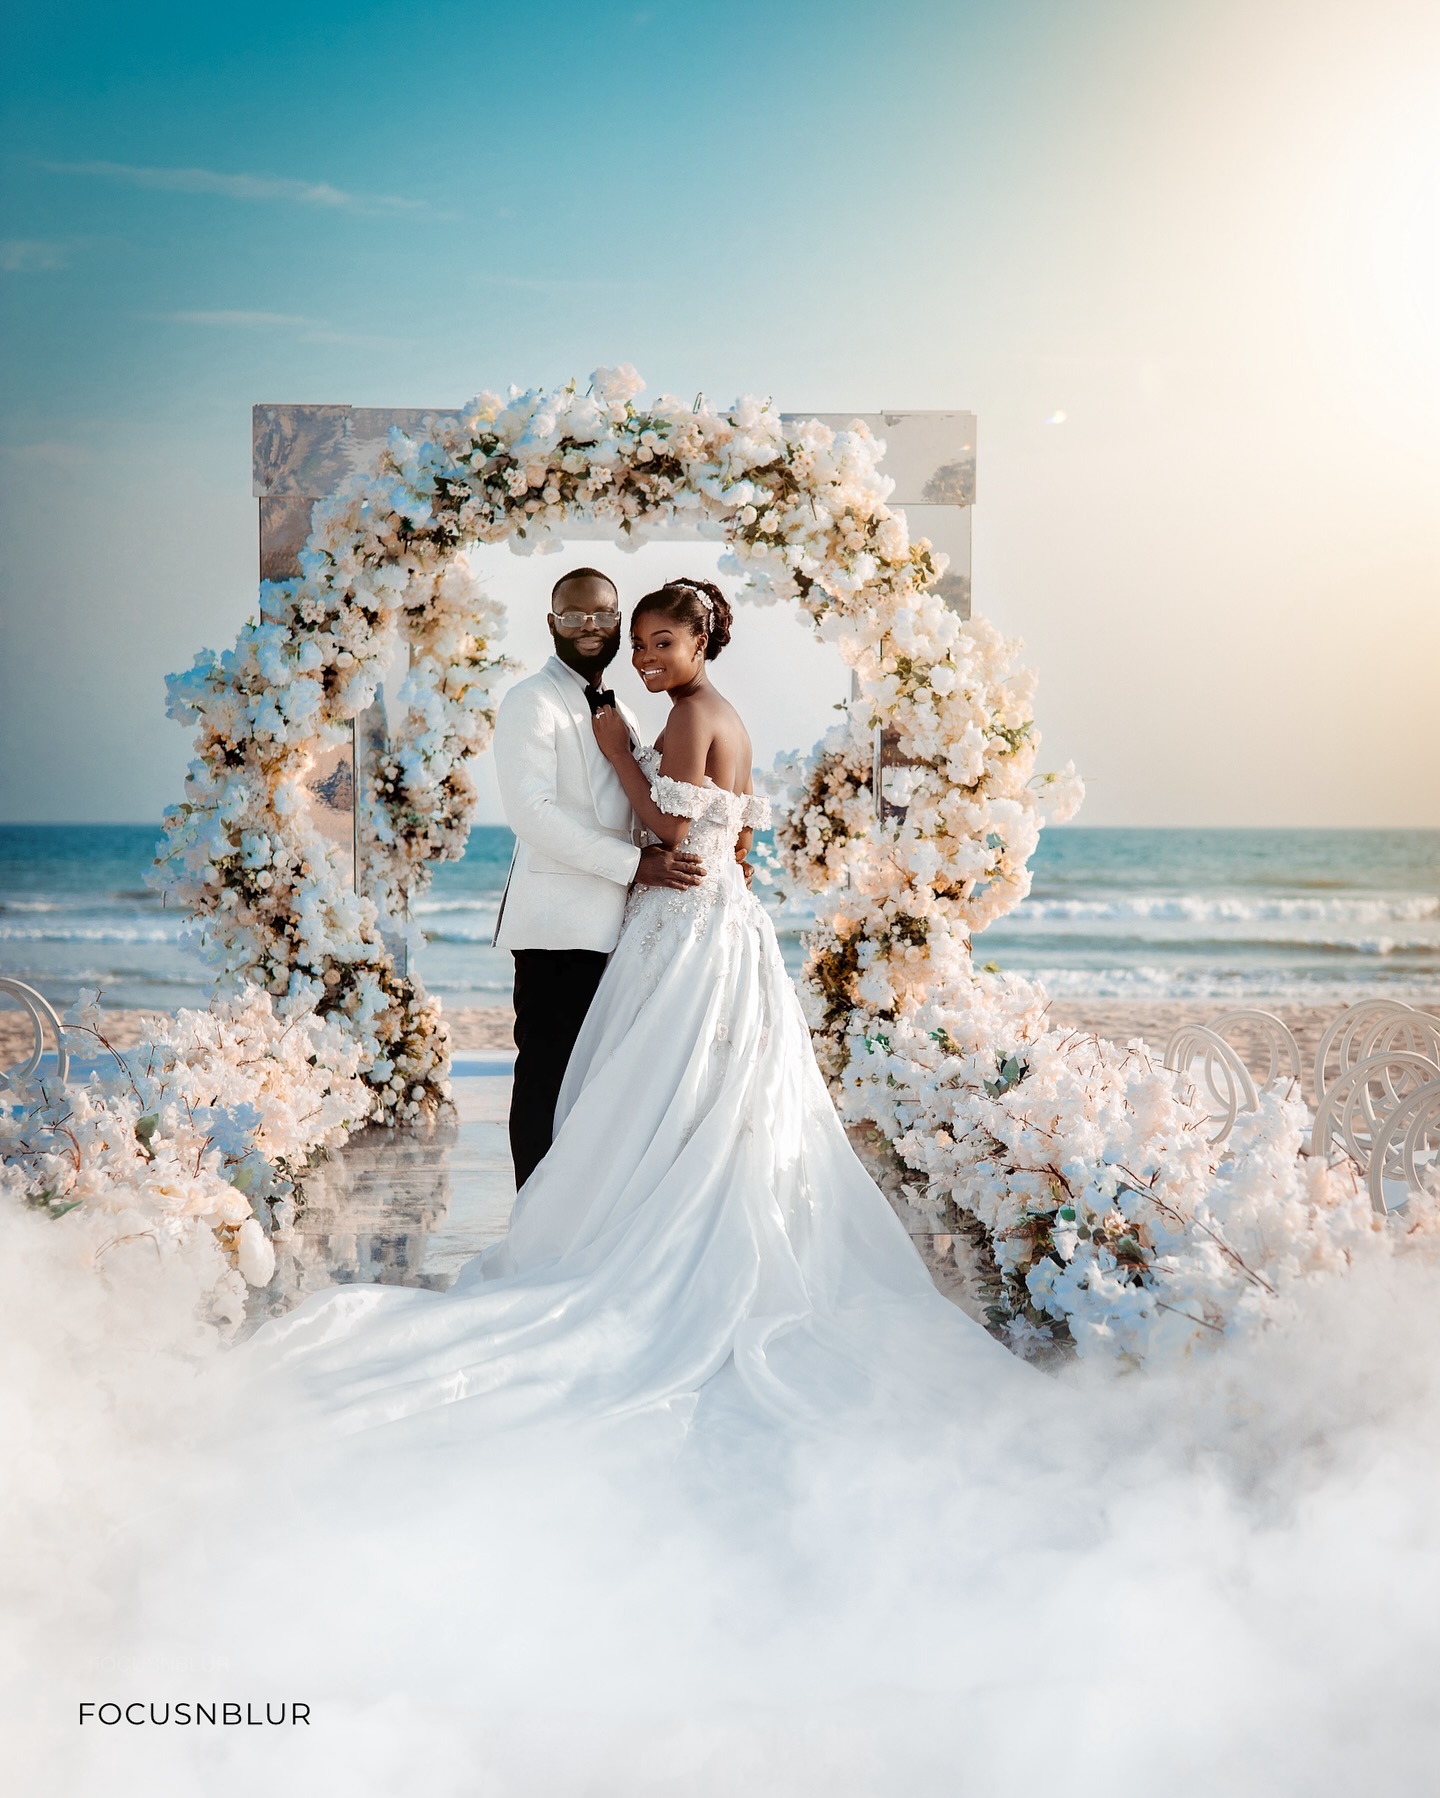 How much does a wedding cost in Ghana?